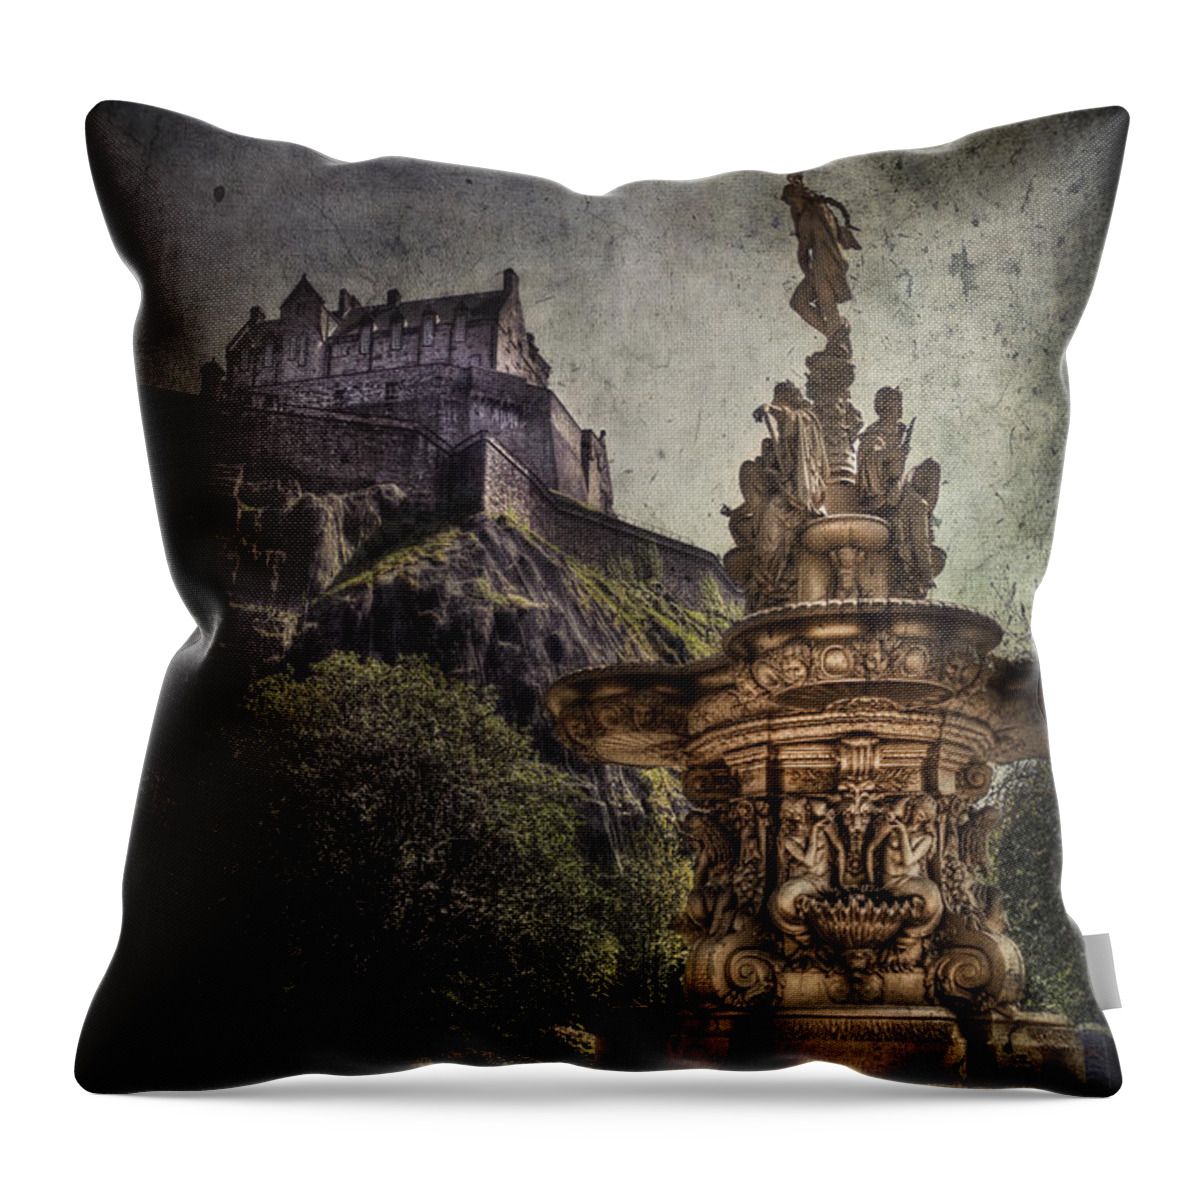 Edinburgh Throw Pillow featuring the photograph Bound For Glory by Evelina Kremsdorf